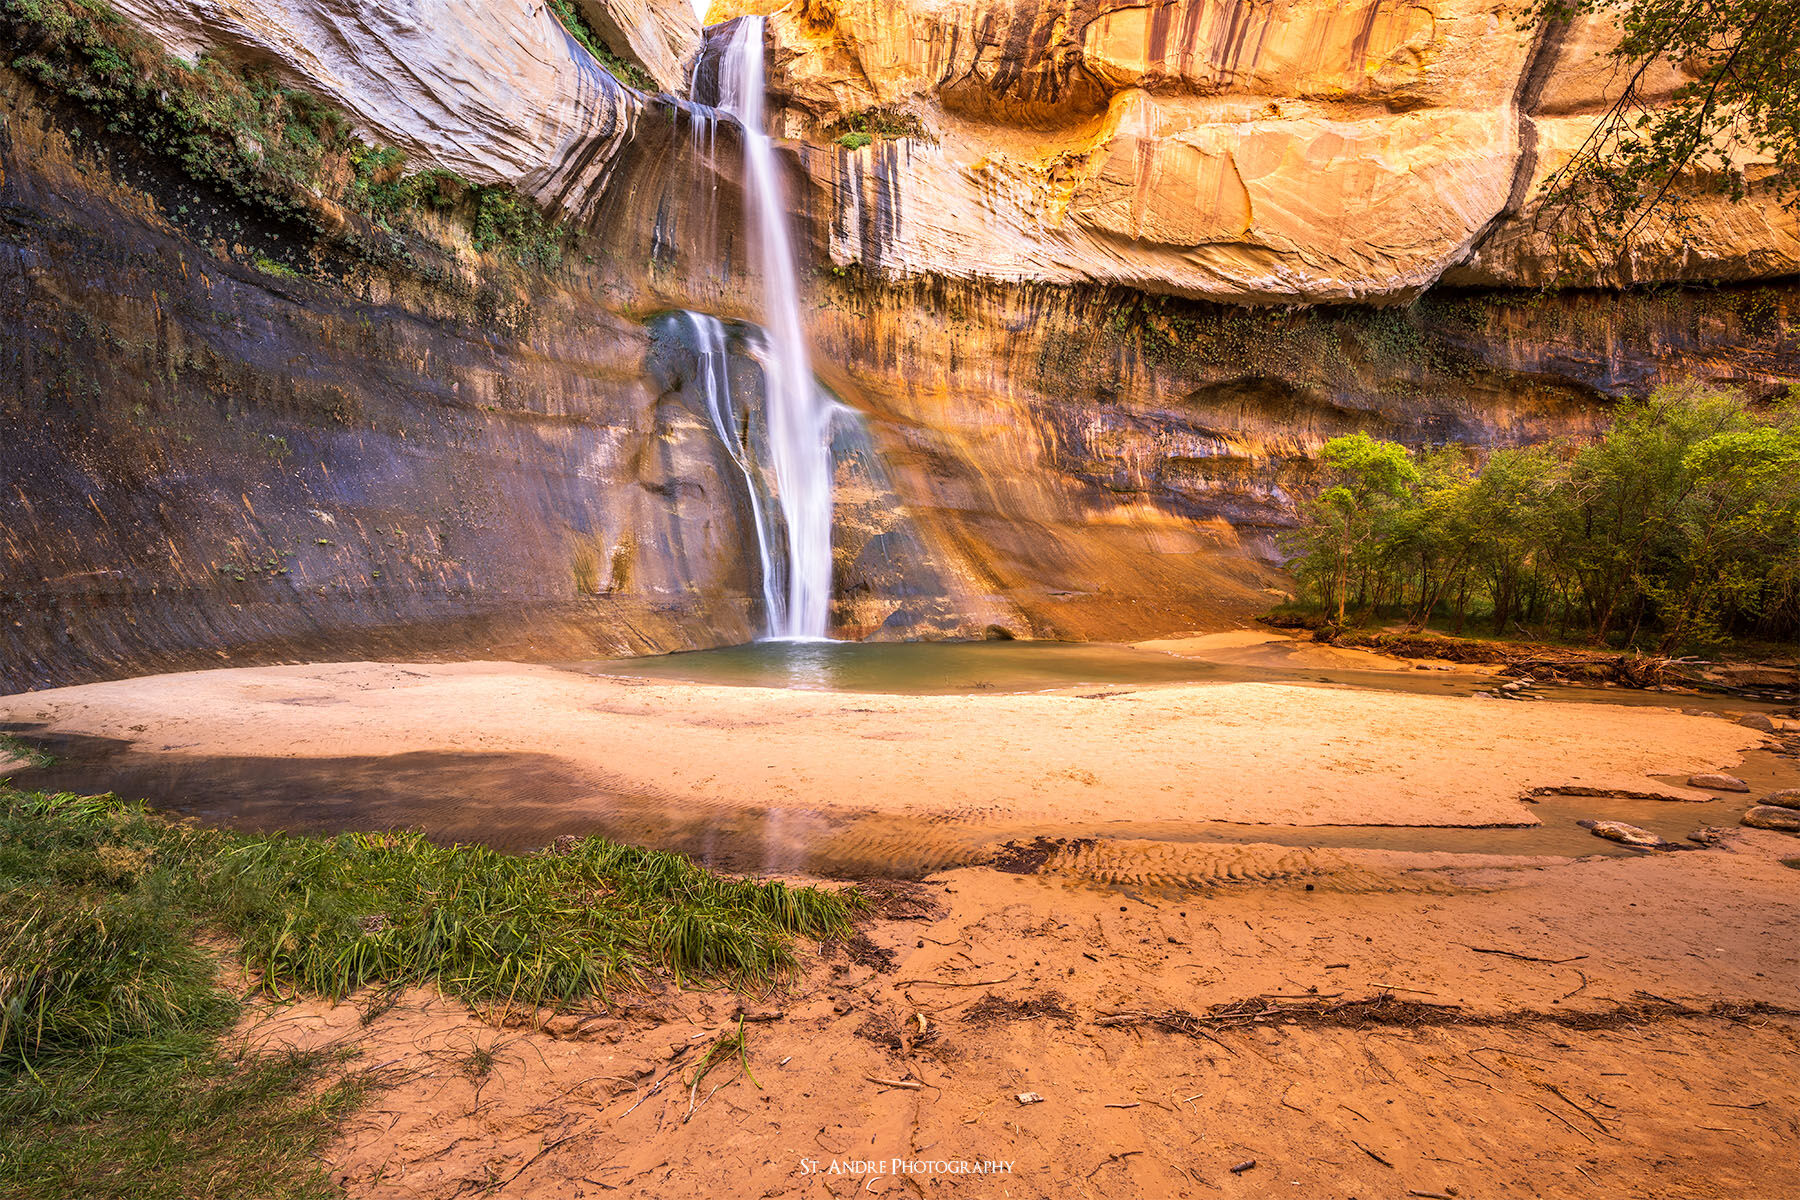 The large waterfalls of Calf Creek Falls cascades off the cliffs into a large canyon surrounded by green riparian plants. 